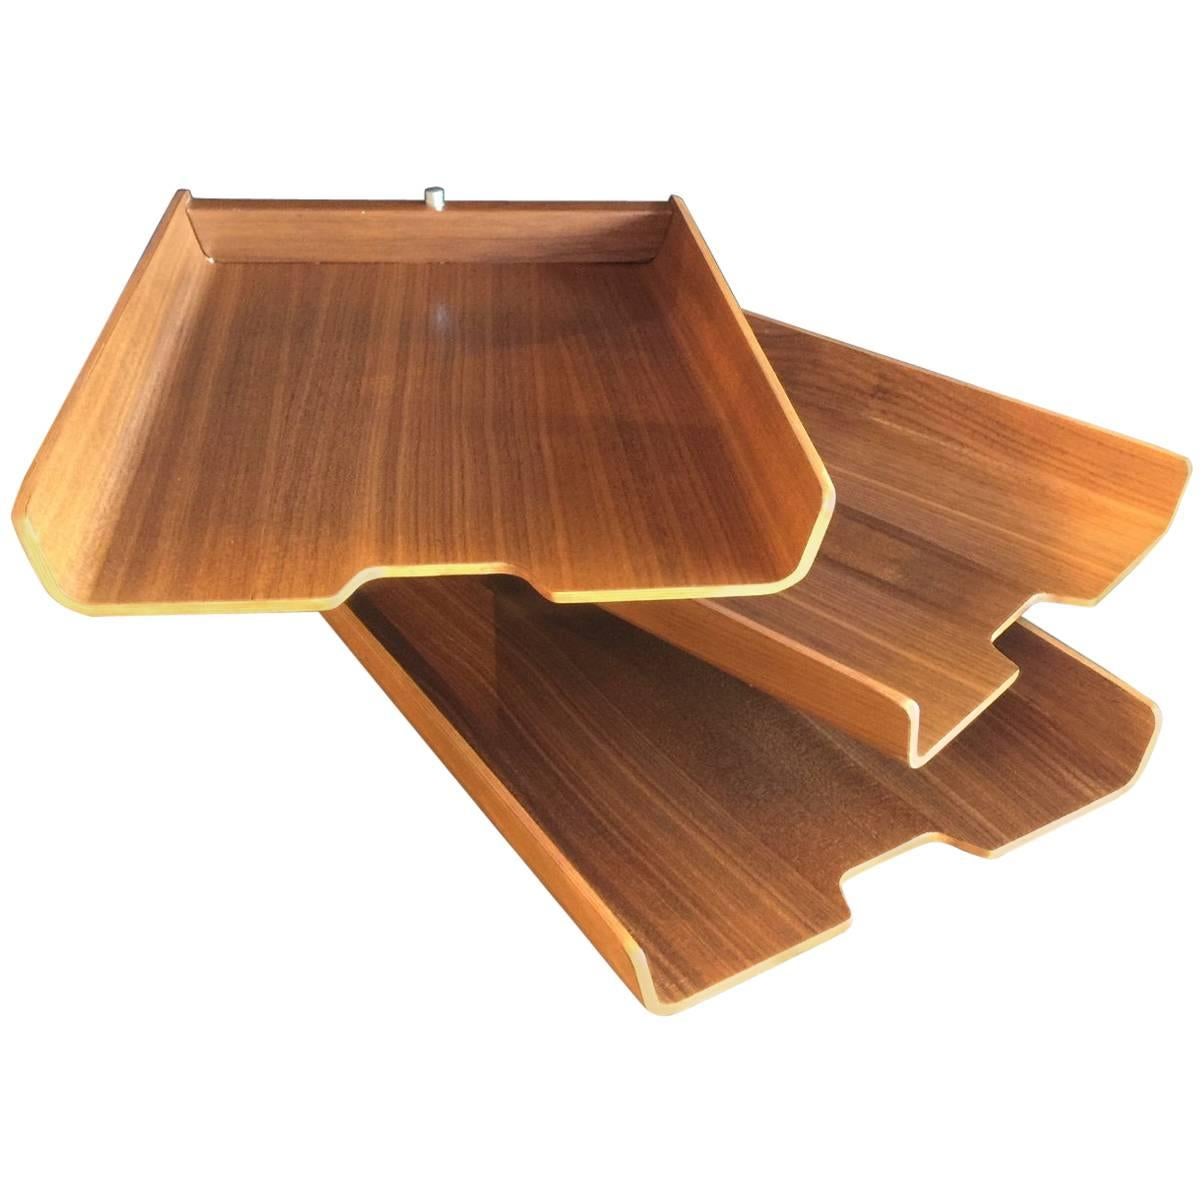 Molded Teak Plywood Triple Letter Tray by Martin Aberg for Rainbow of Sweden